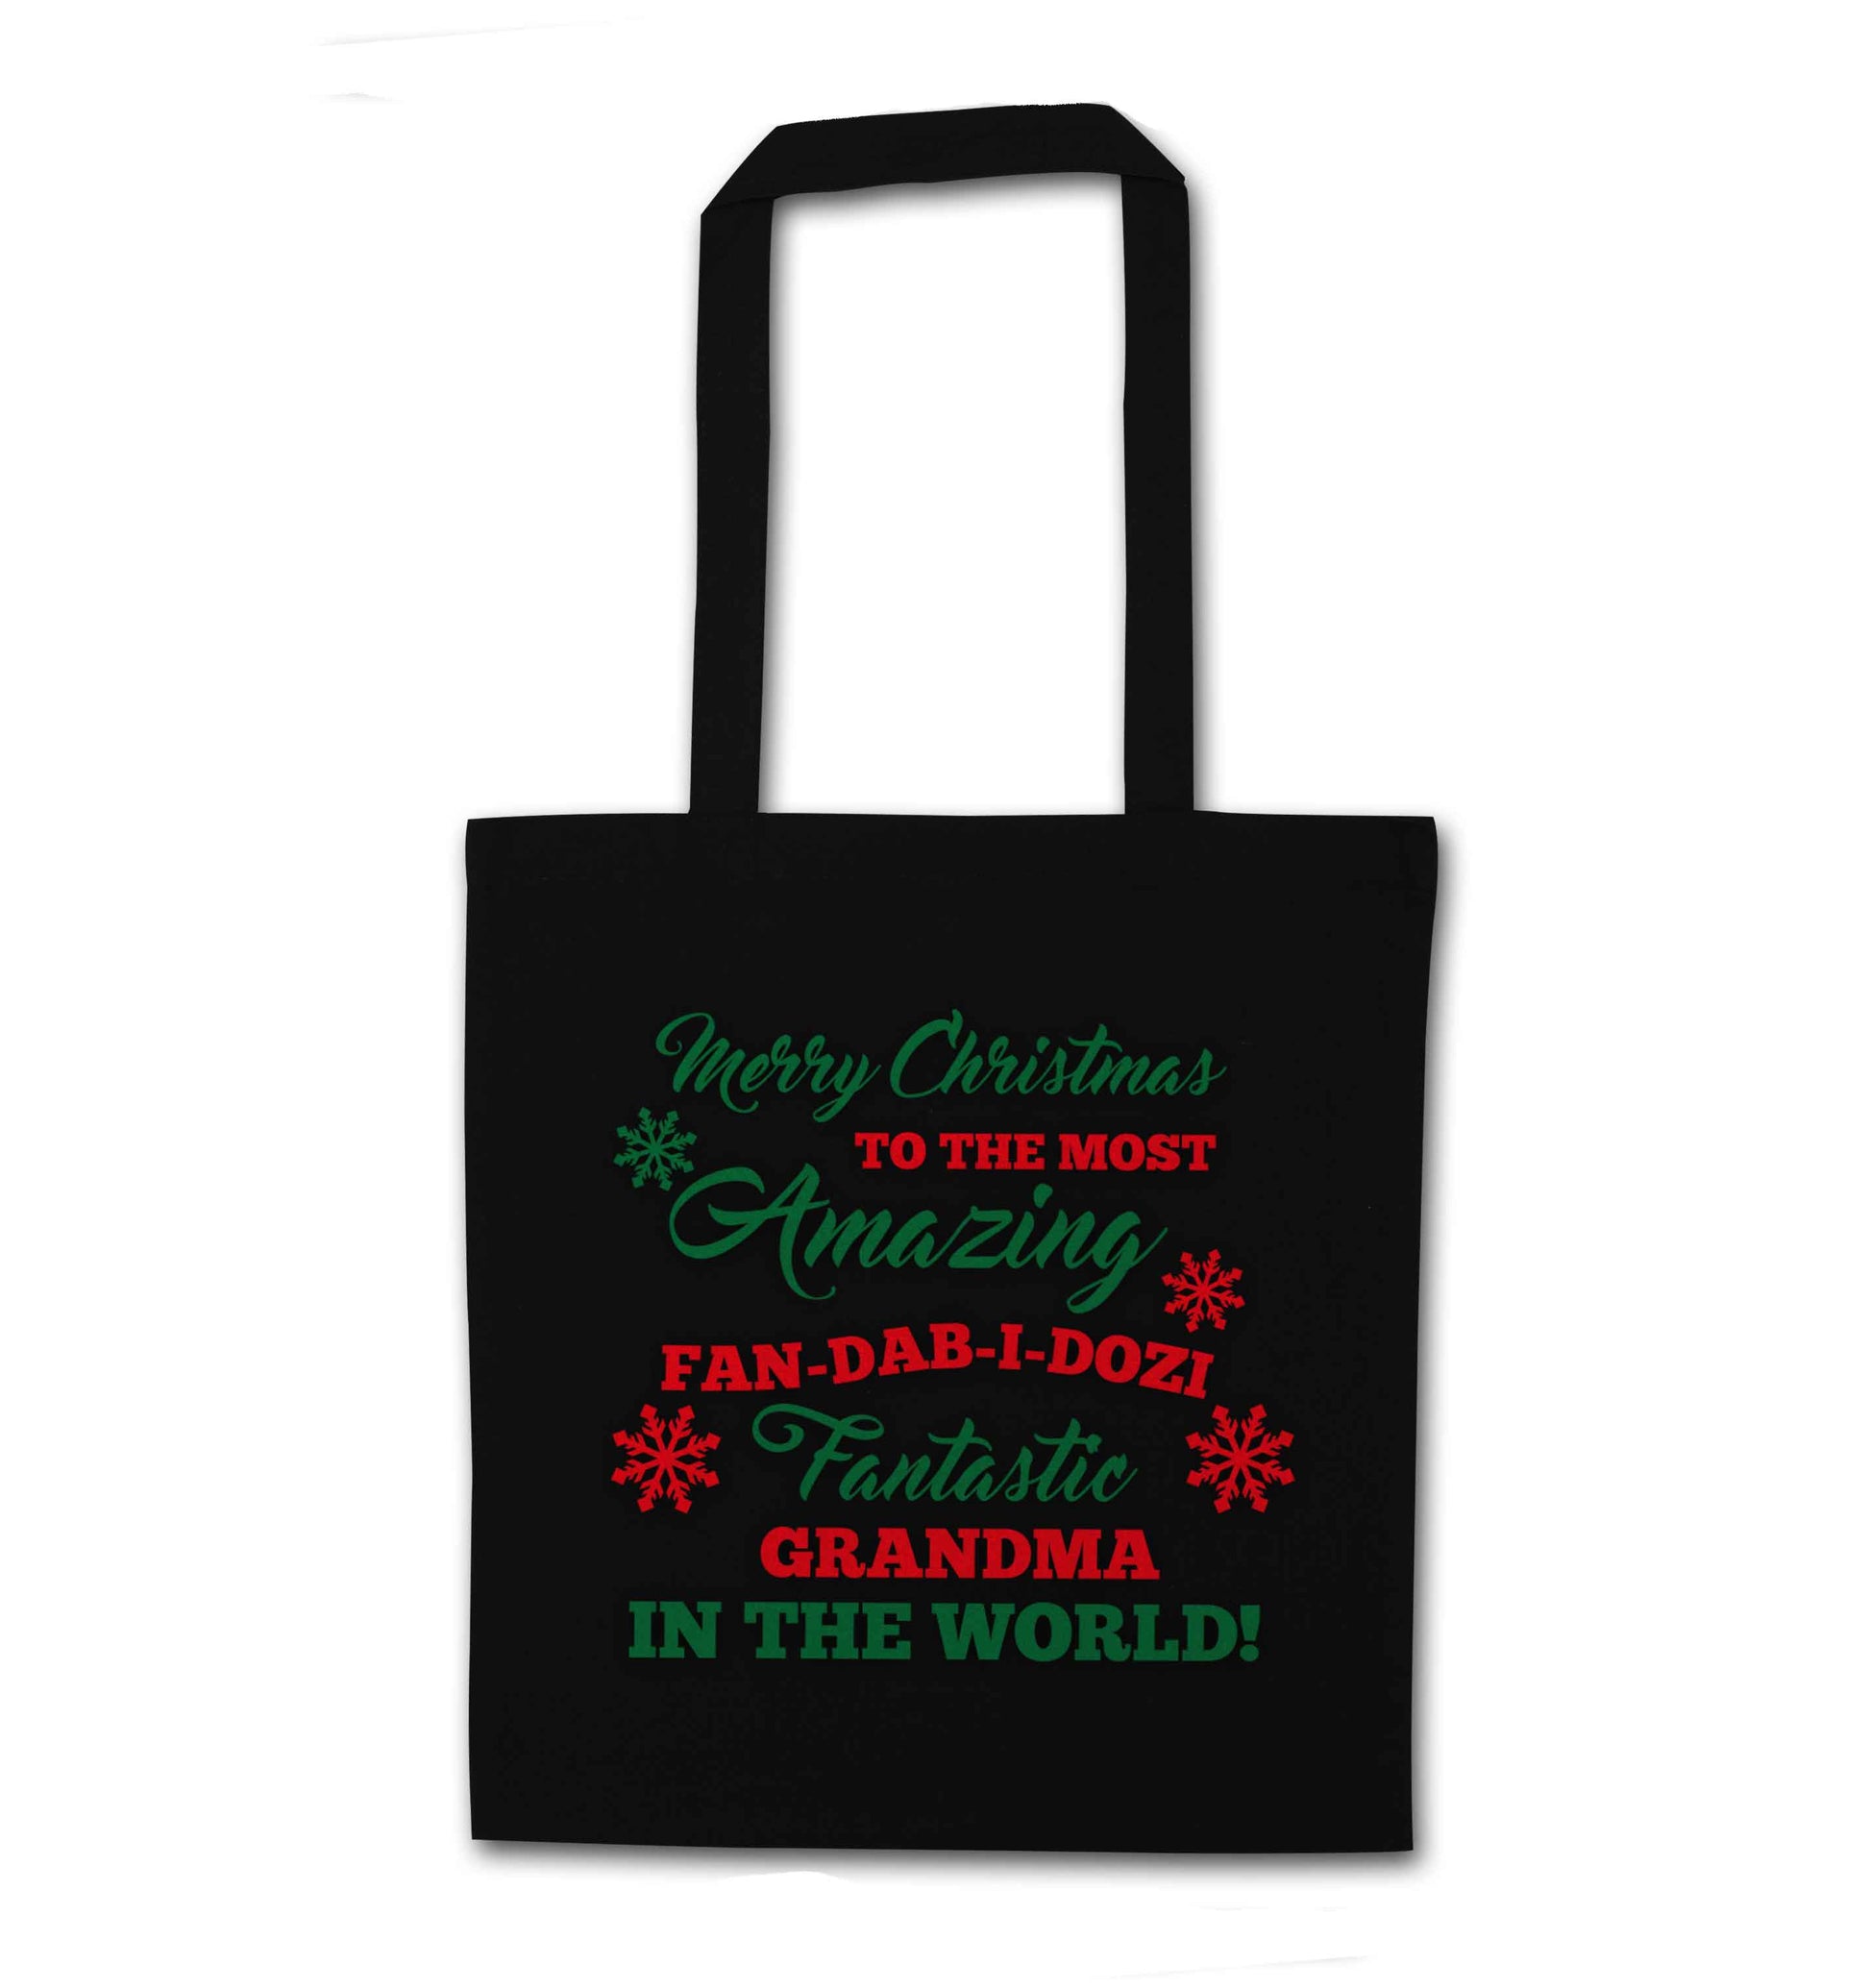 Merry Christmas to the most amazing fan-dab-i-dozi fantasic Grandma in the world black tote bag